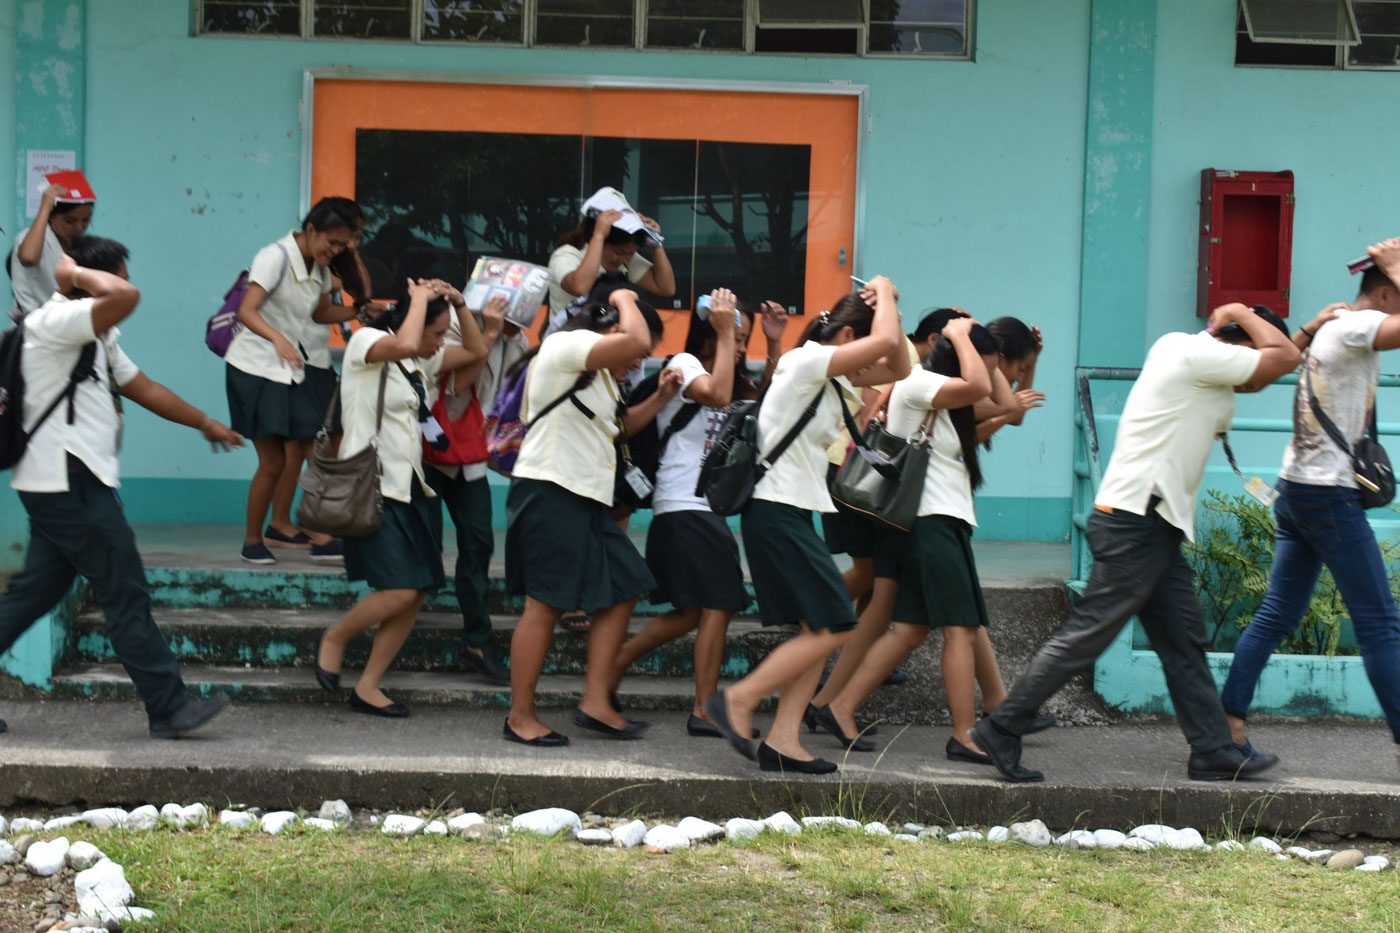 IN PHOTOS: Ormoc City kicks off 3rd nationwide earthquake drill for 2019